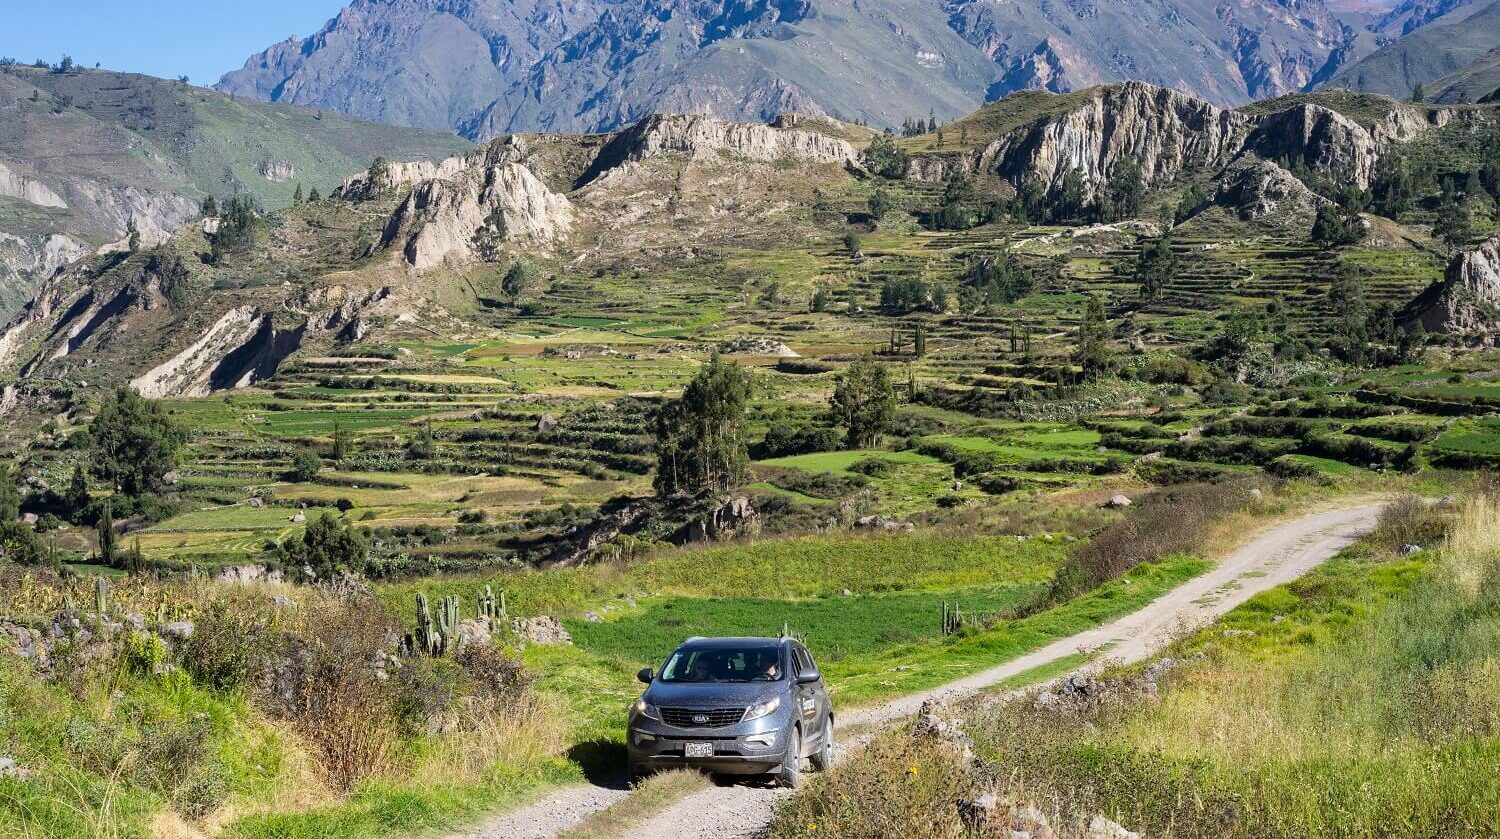 Spectacular views of the terraces of the Colca Canyon during an offroad route on our Road Trip - RESPONSible Travel Peru